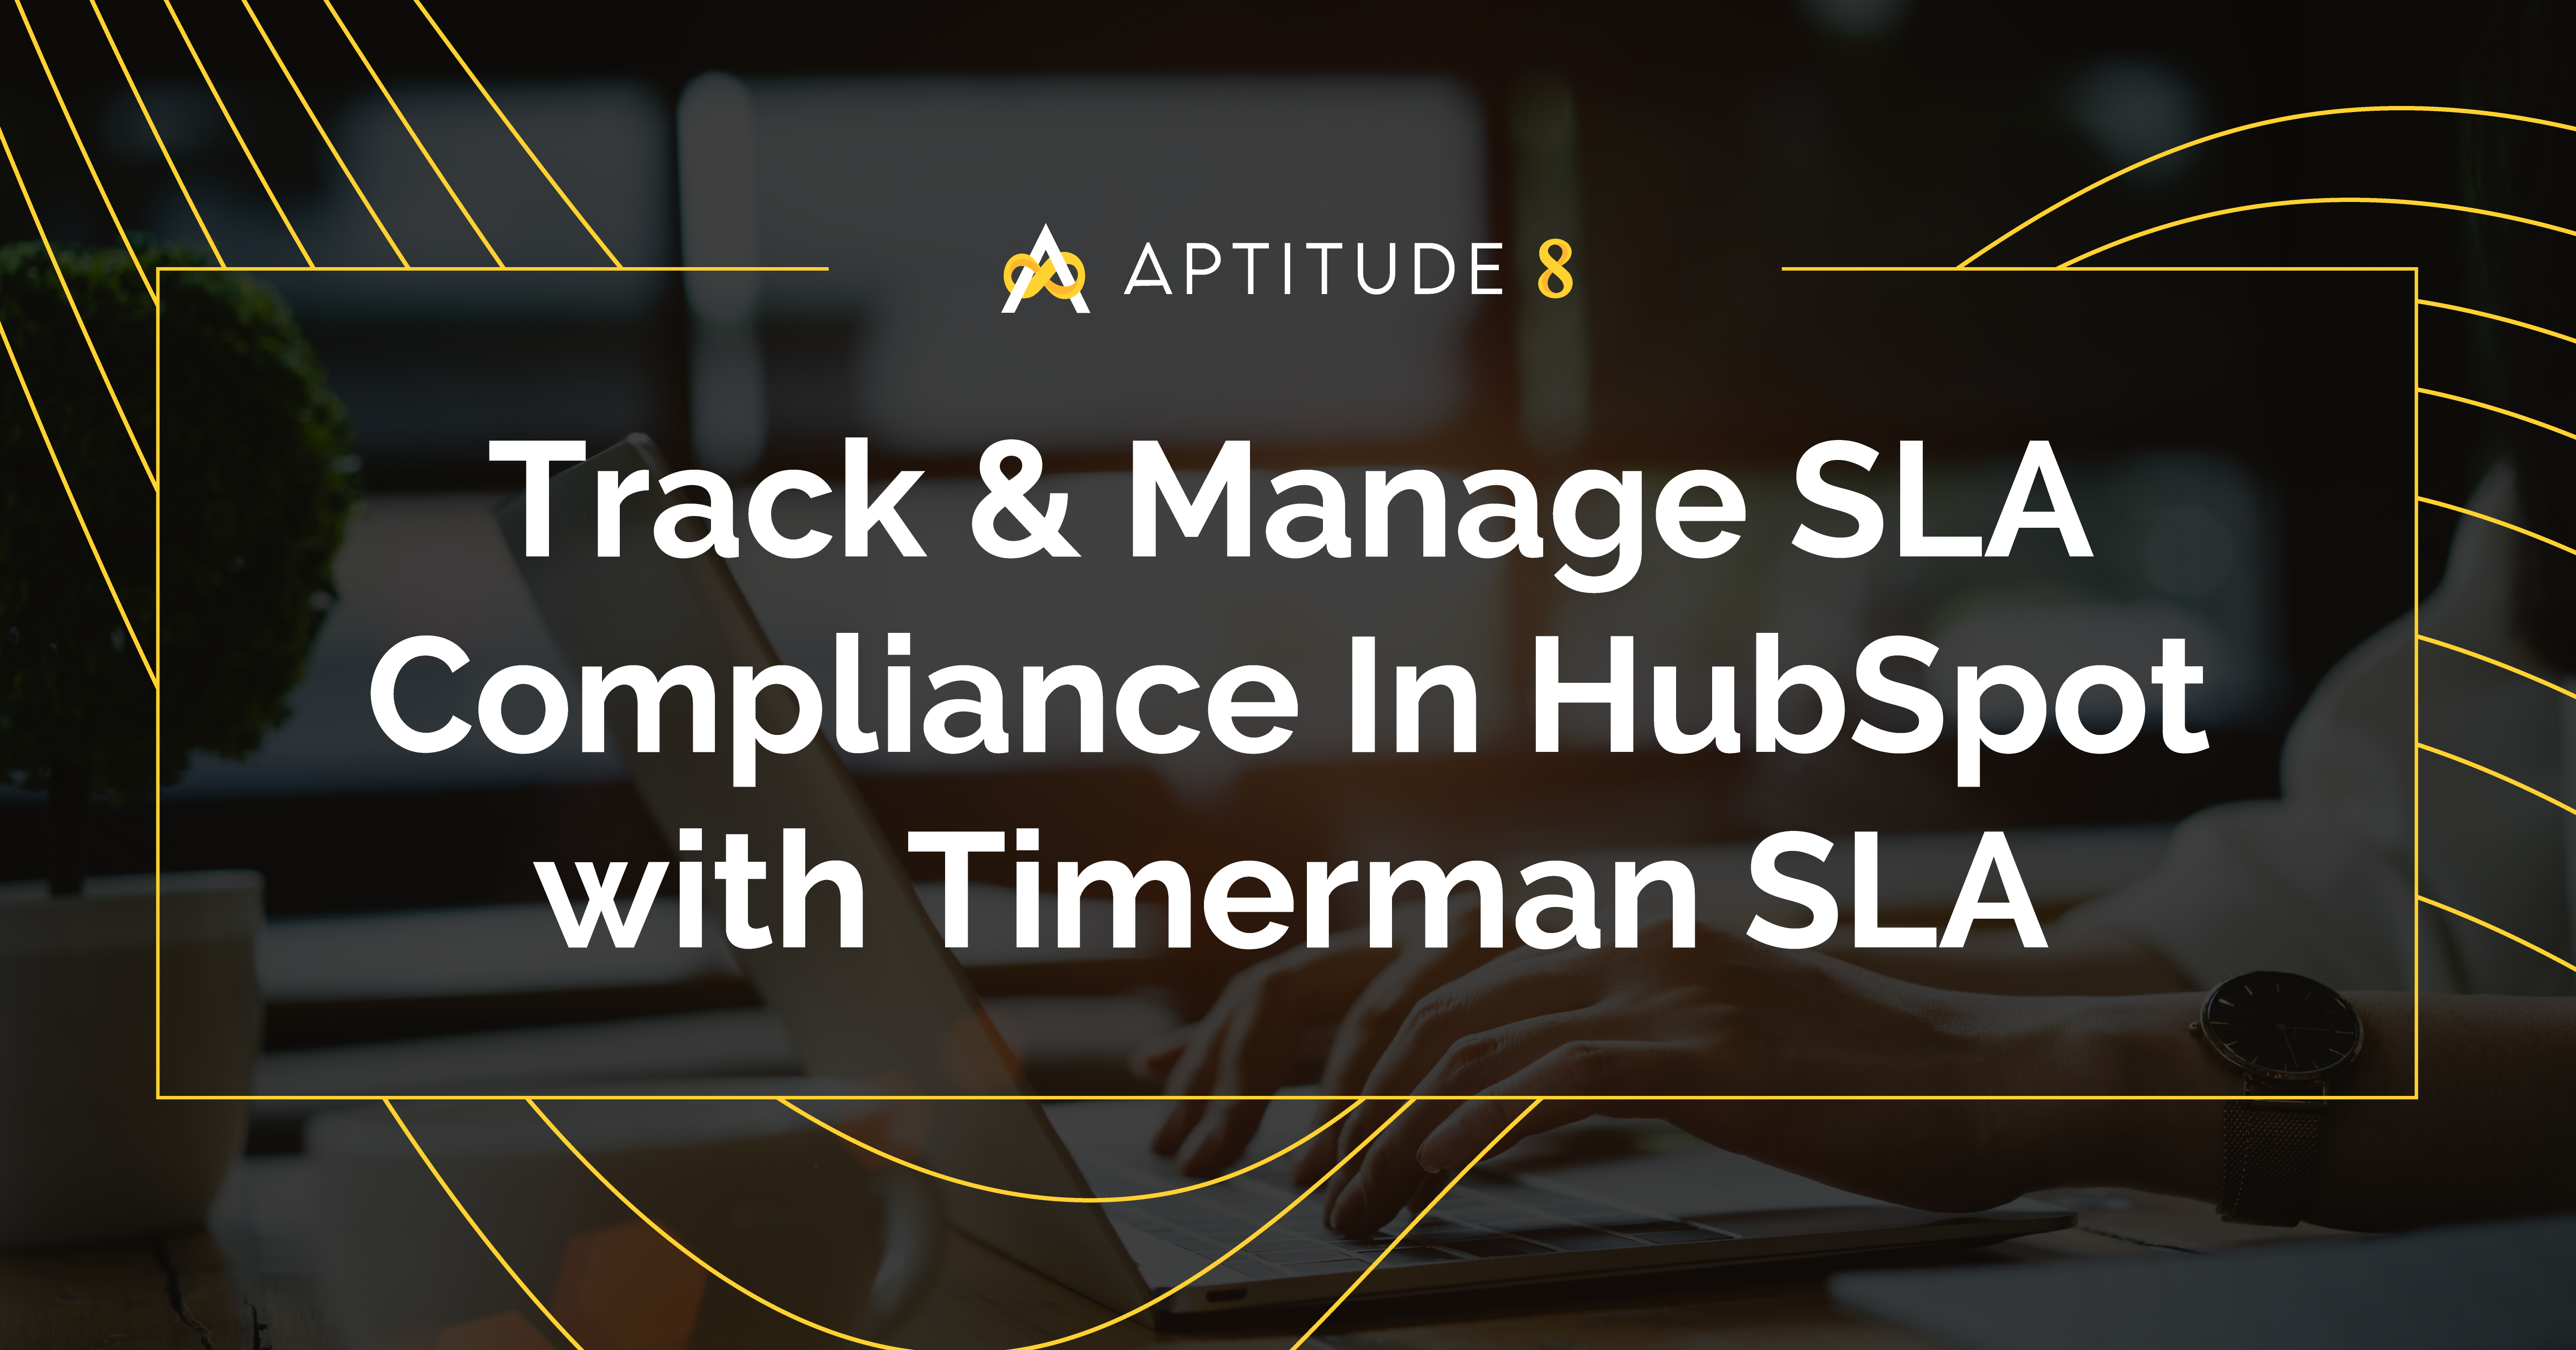 Tracking and Measuring SLA Compliance In HubSpot with Timerman SLA